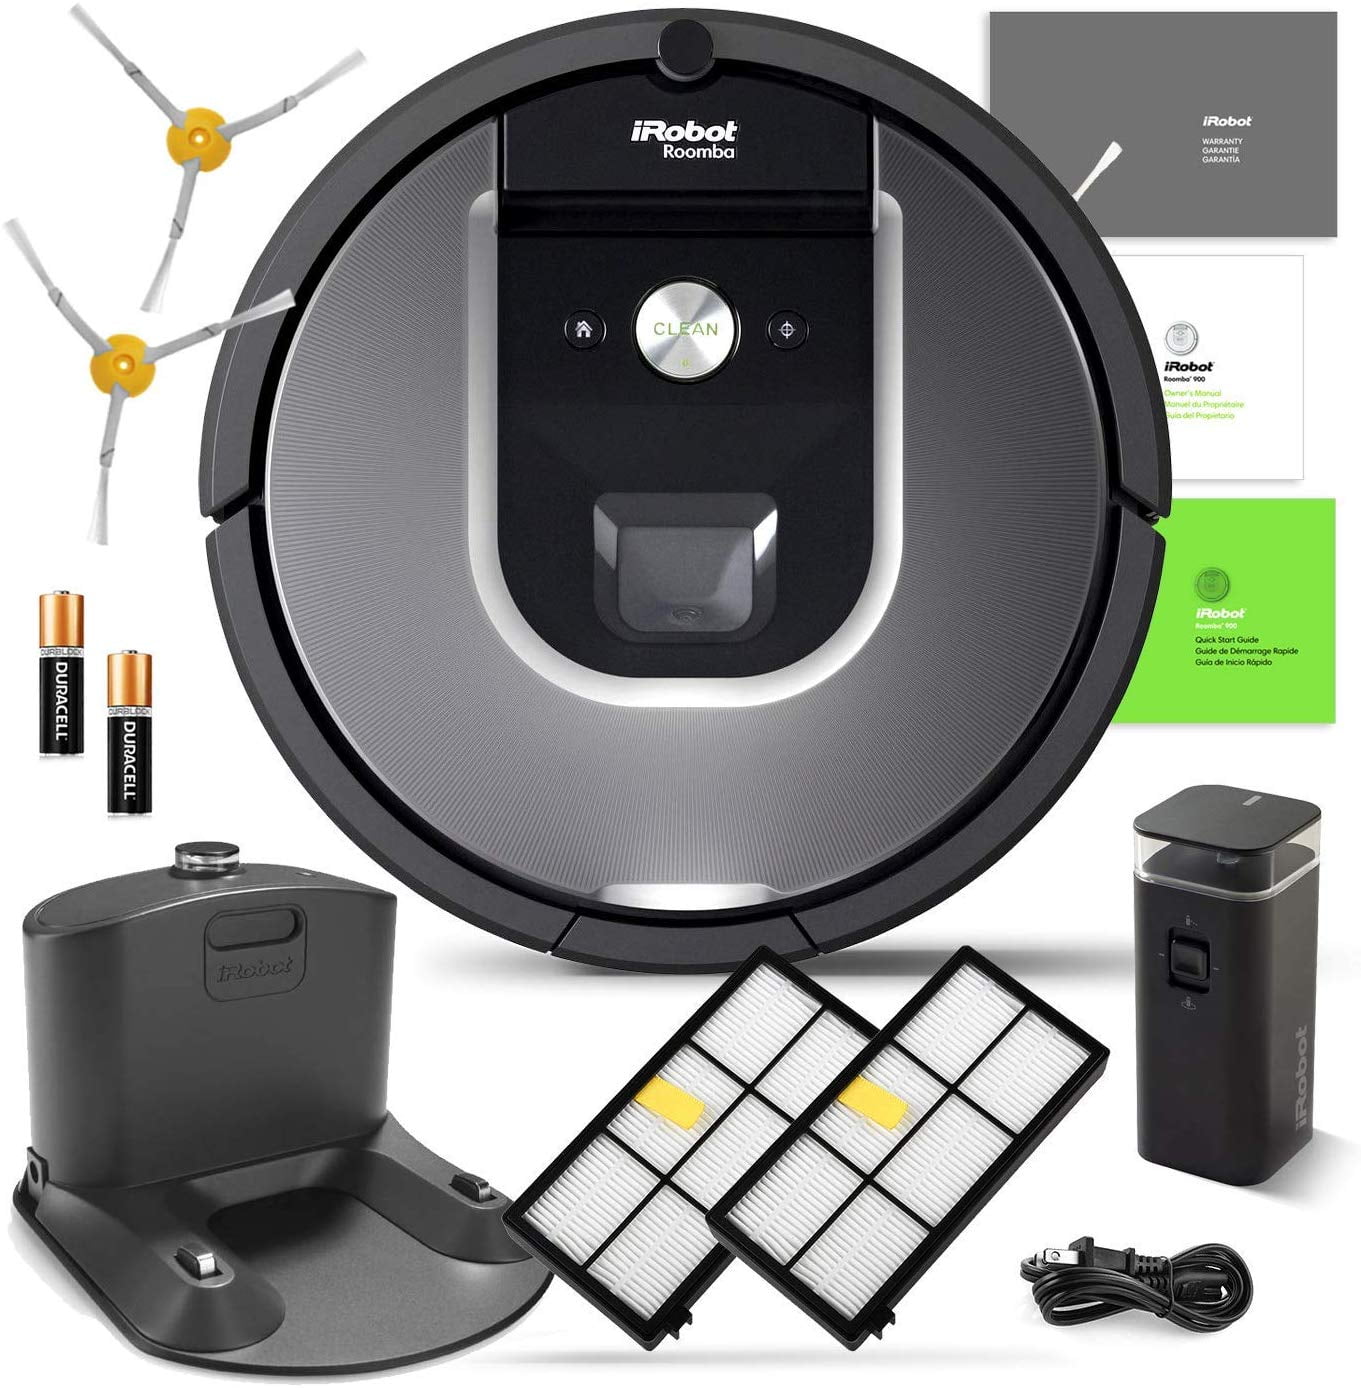 Used iRobot Roomba 960 Robot Vacuum with Wi-Fi Connectivity, Compatible with Alexa, for Hair, Carpets, Hard Floors -